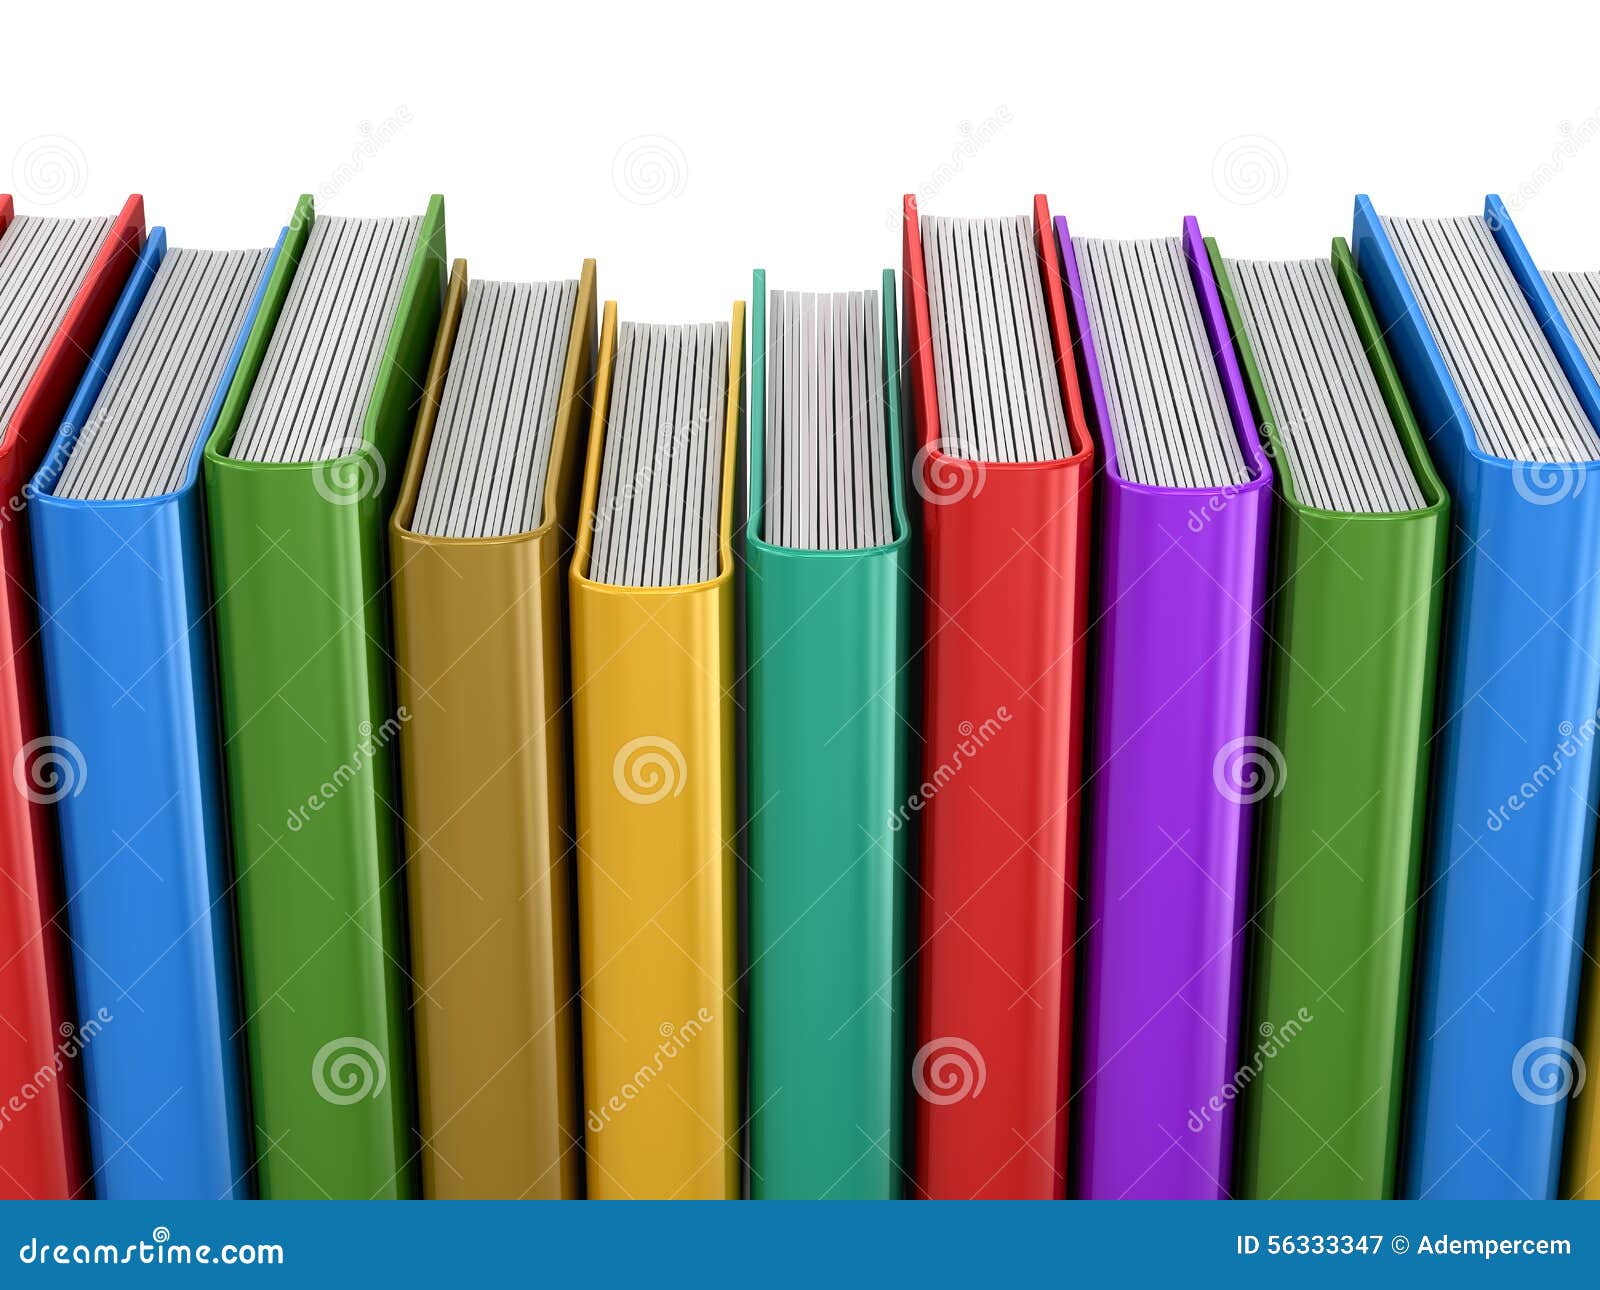 Colorful Book stock illustration. Illustration of computer - 56333347